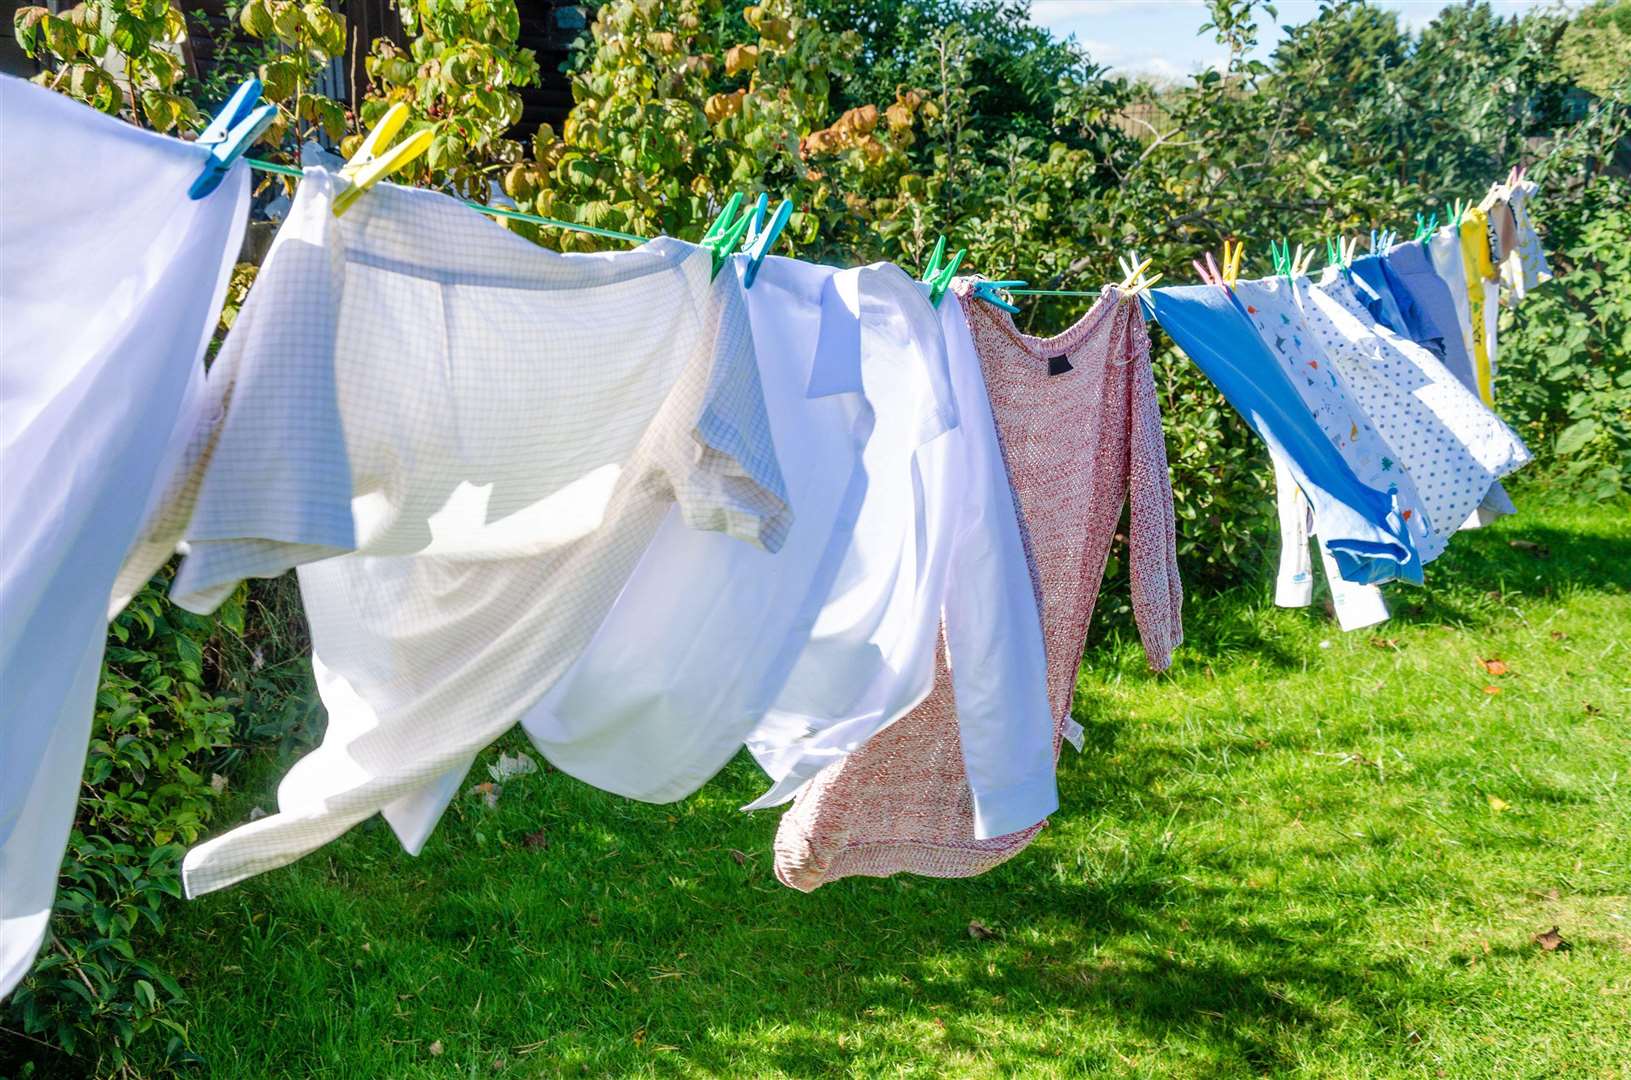 On dry days use the outside to dry your clothes and not the tumble dryer. Image: iStock.